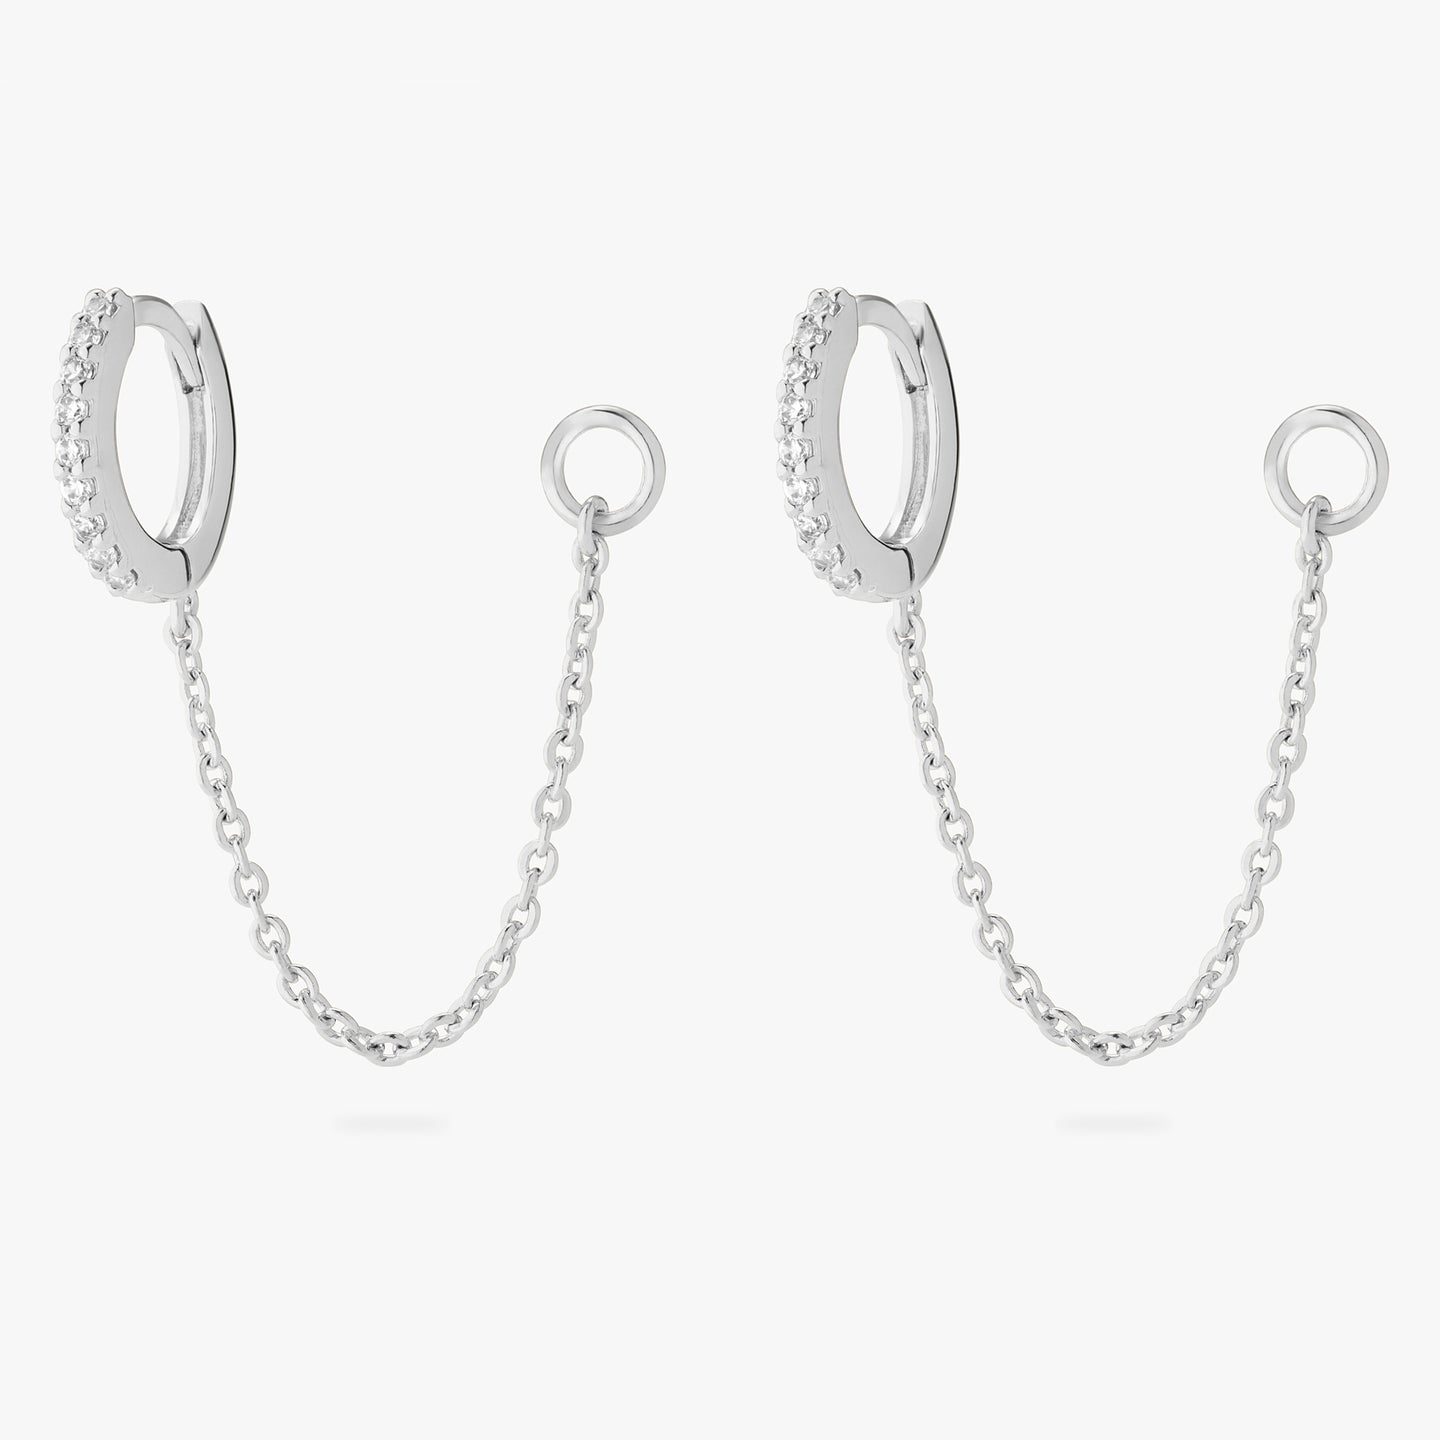 An image of a silver/clear mini pave huggies with connector chains to open 4mm wide jump ring. [hover] color:null|silver/clear